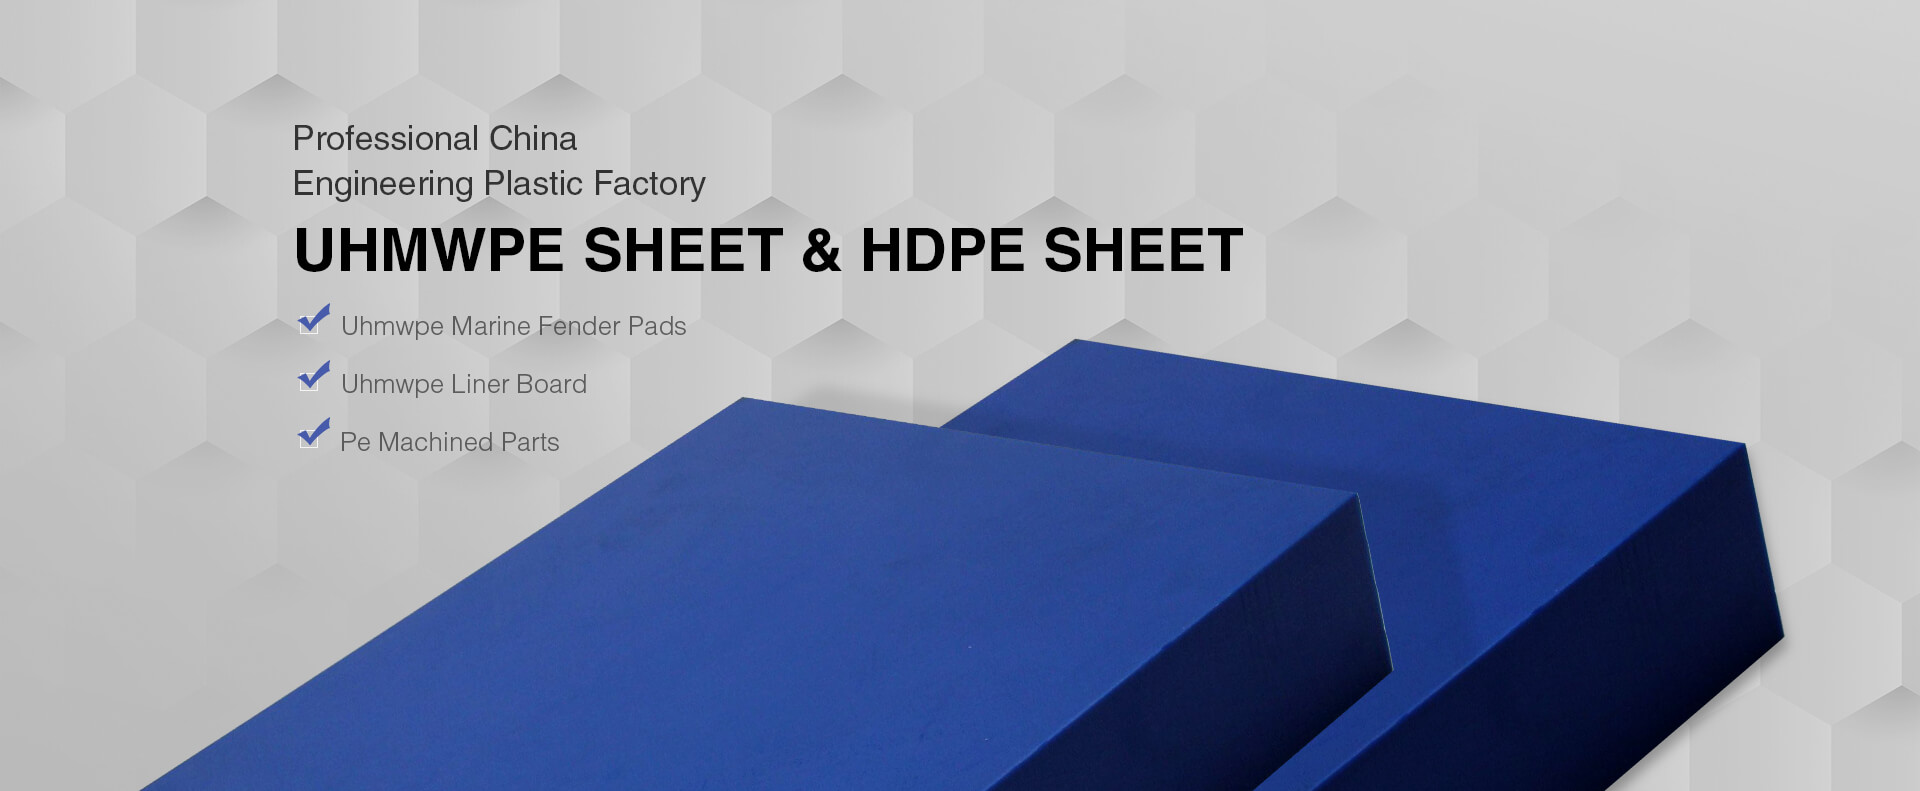 Uhmwpe Sheet Products